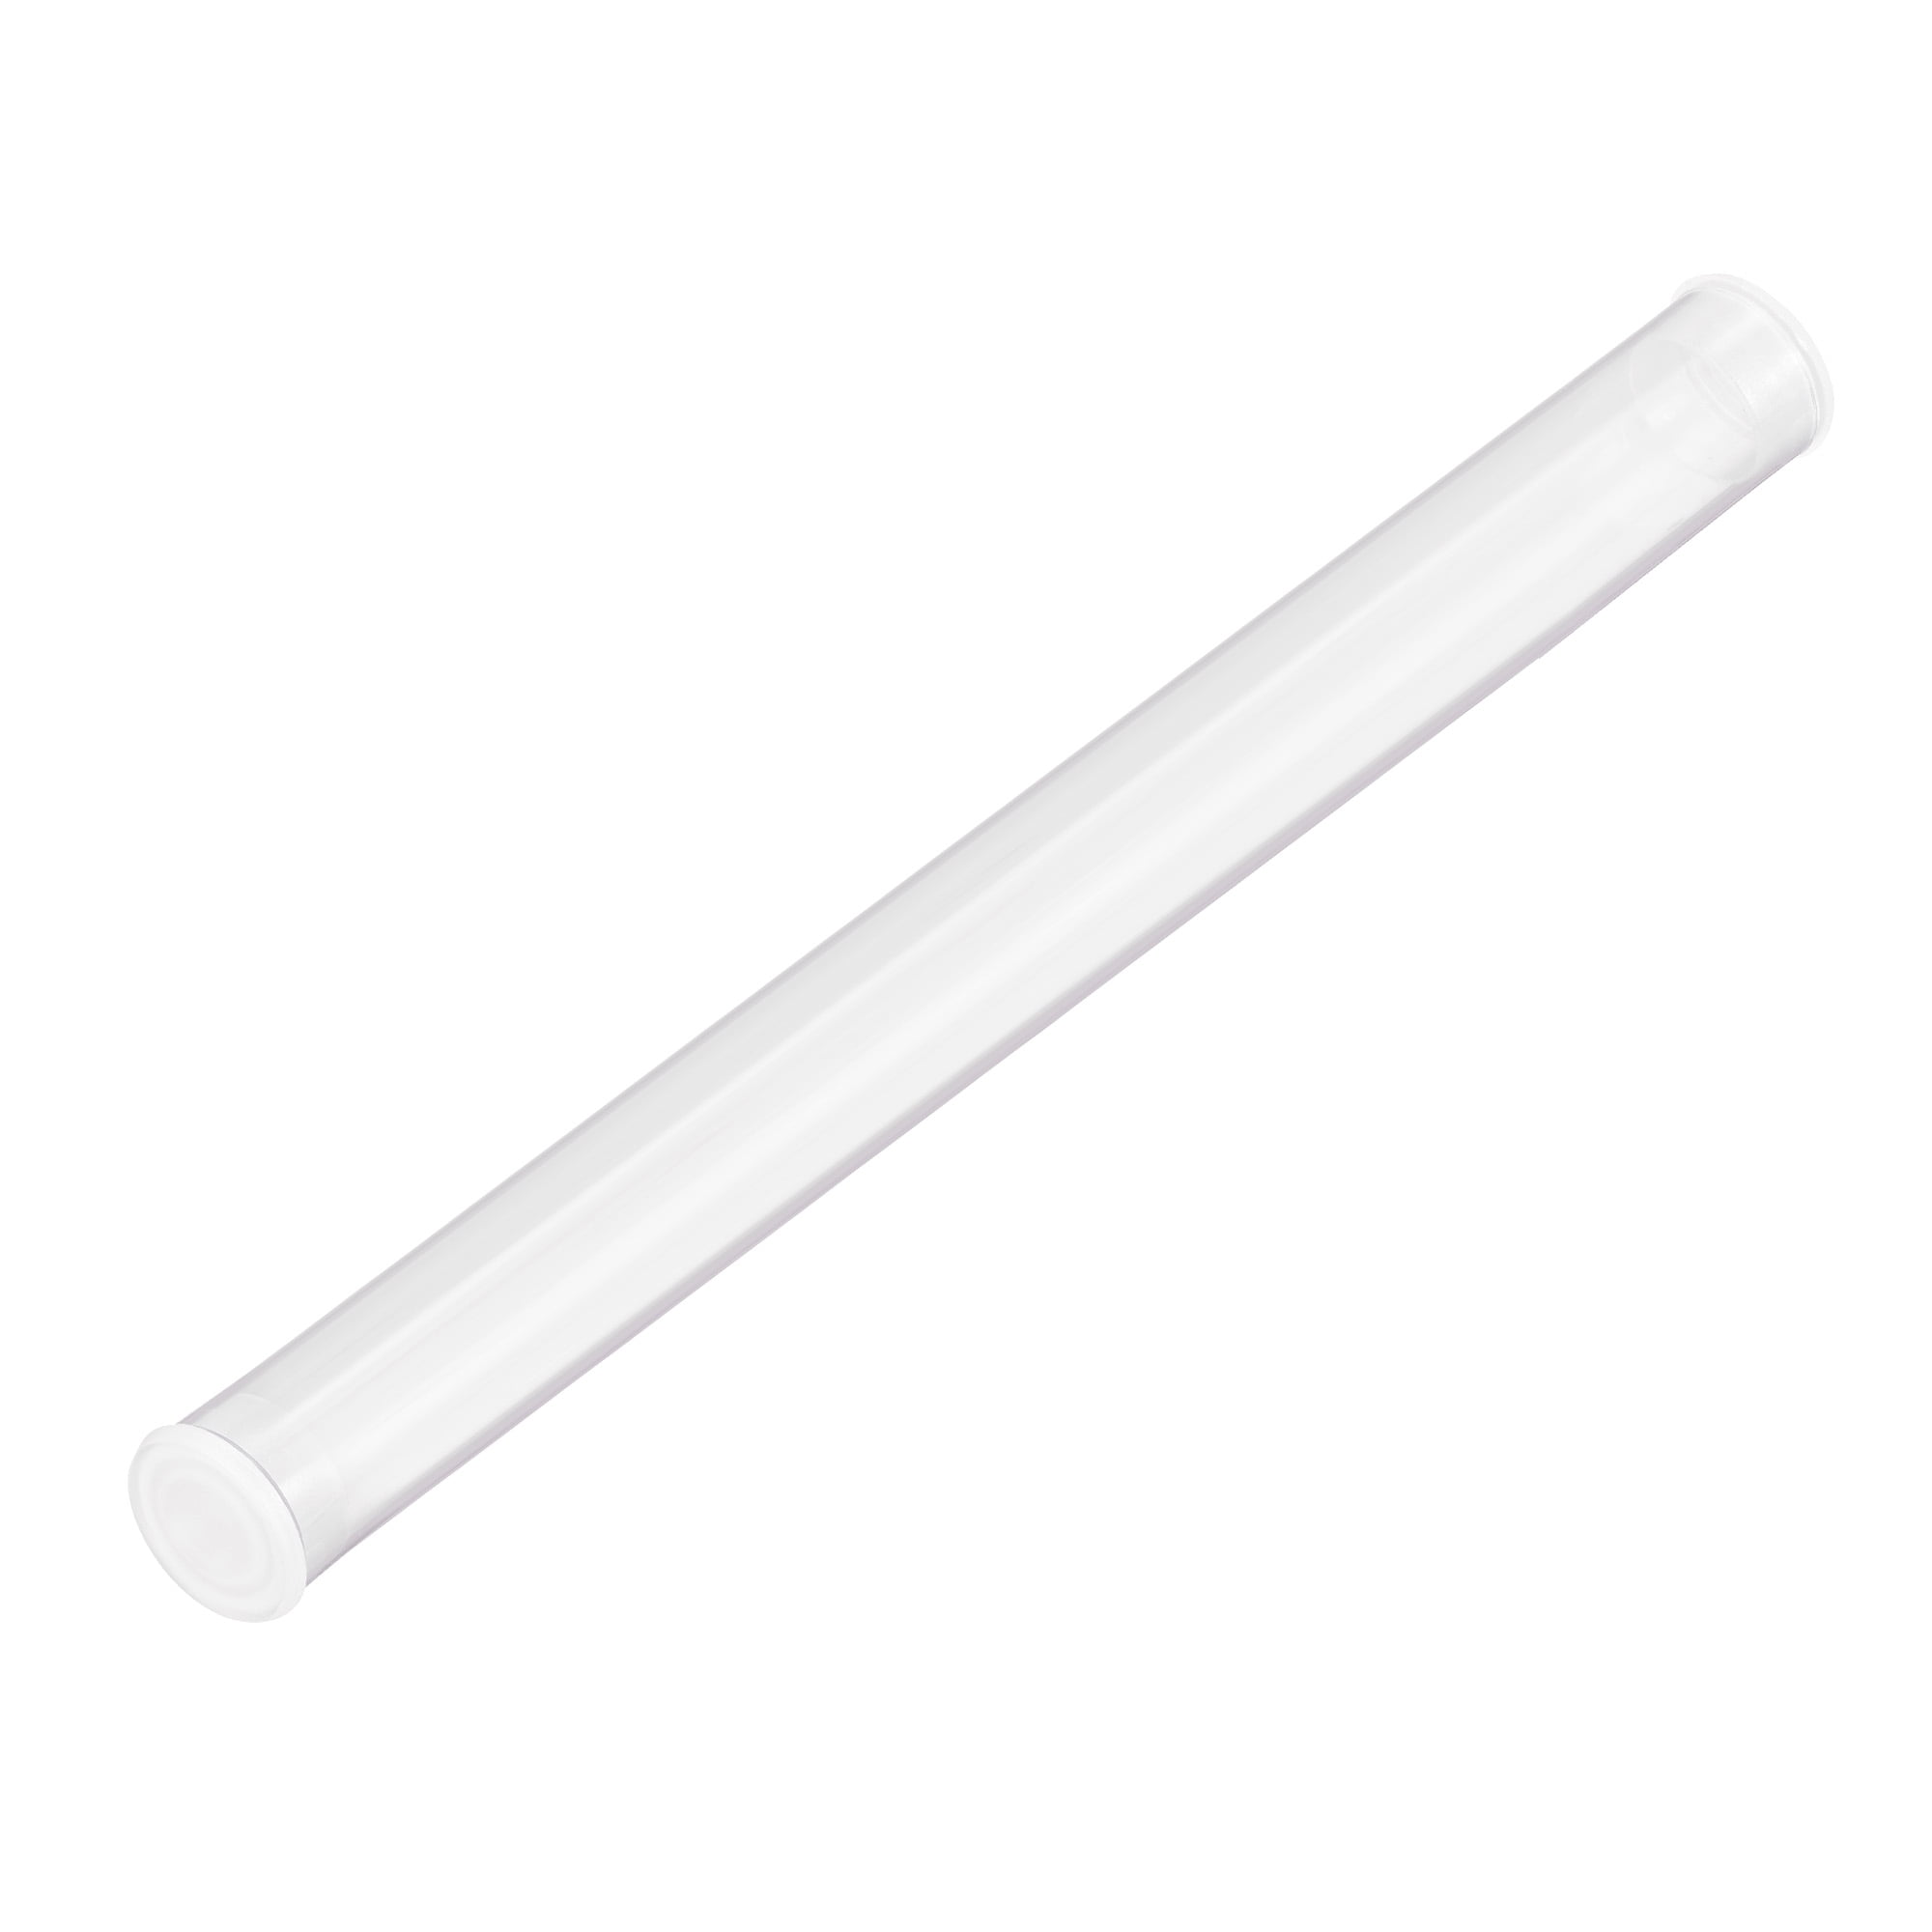 ODx610mm IDx6mm 0.23 Inch 0.16 Inch 2Ft Length Plastic Tube uxcell Polycarbonate Rigid Round Clear Tubing 4mm 